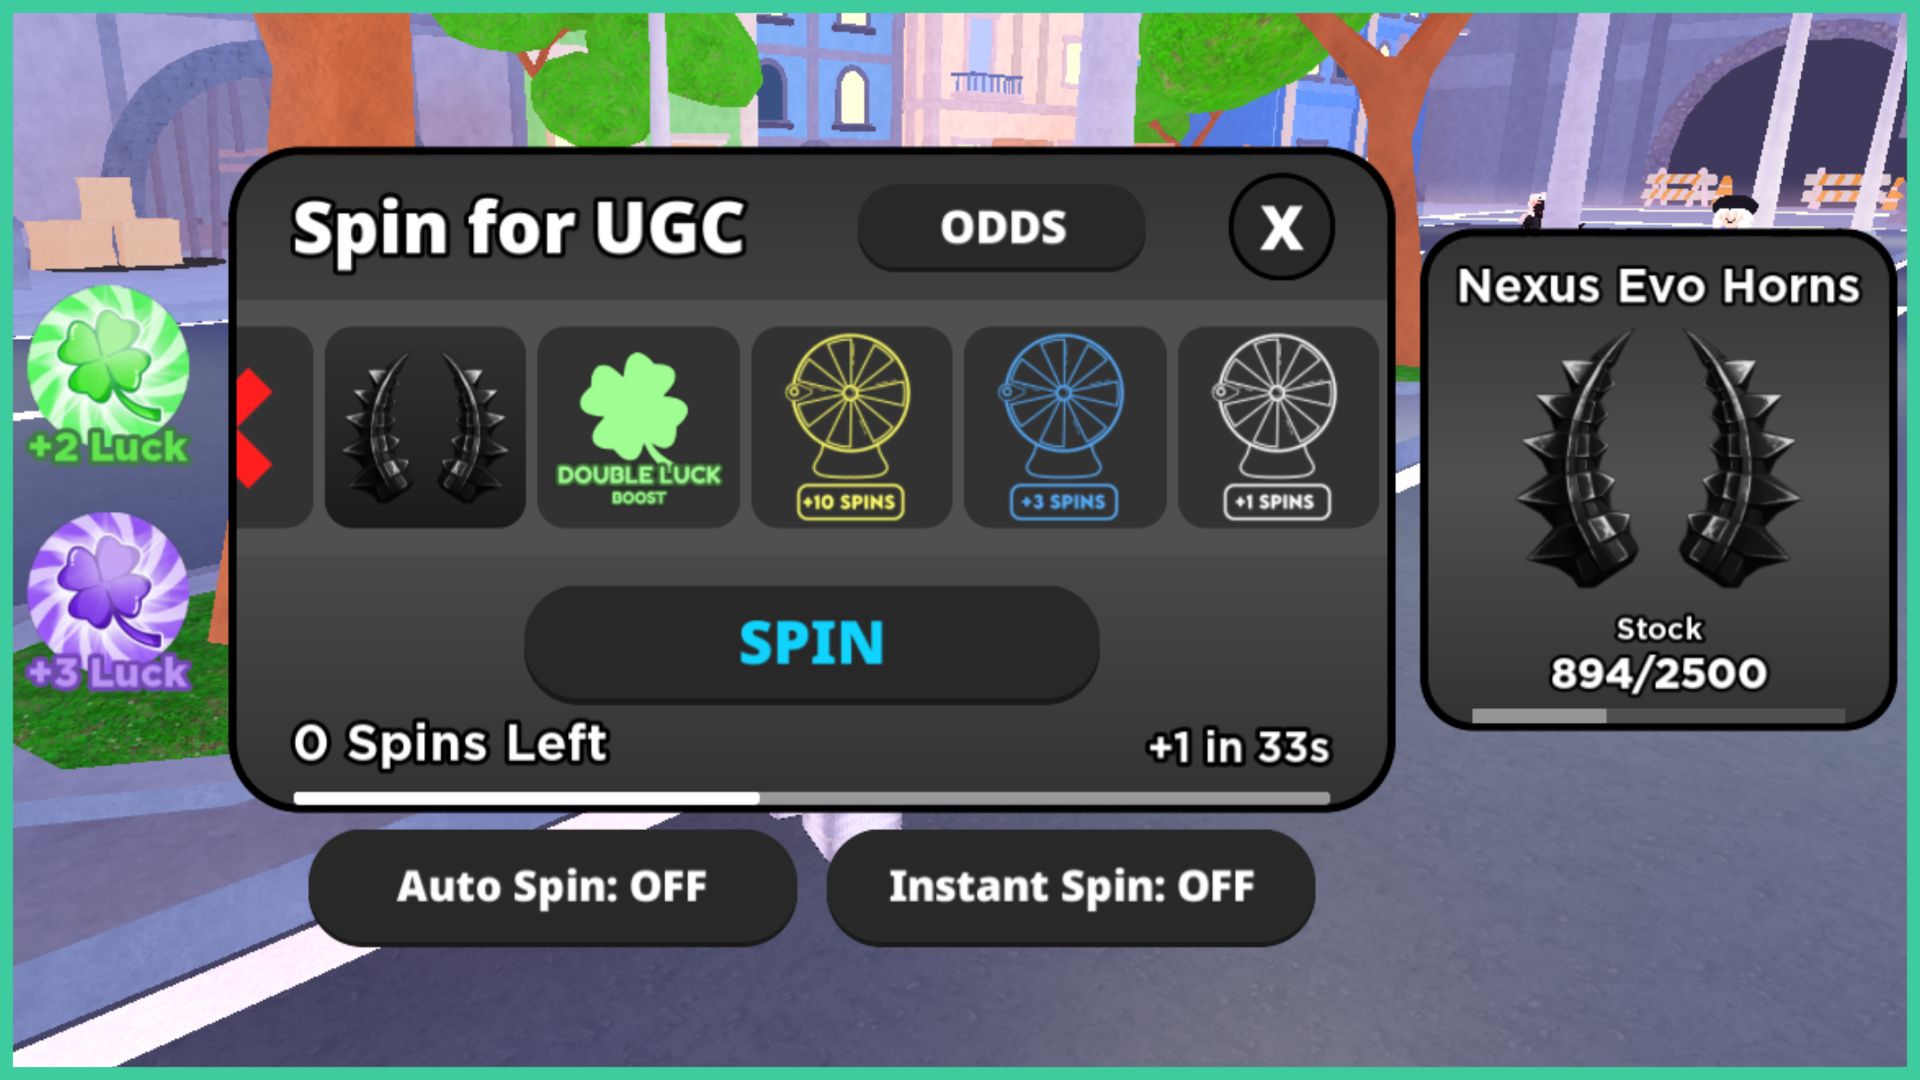 feature image for our spin 4 free ugc codes guide, the image features a screenshot of the spin window with an auto spin button and a instant spin button, the rewards are within the window such as free spins, luck boosts and the UGC item Nexus Evo Horns, behind this spin window there is a city